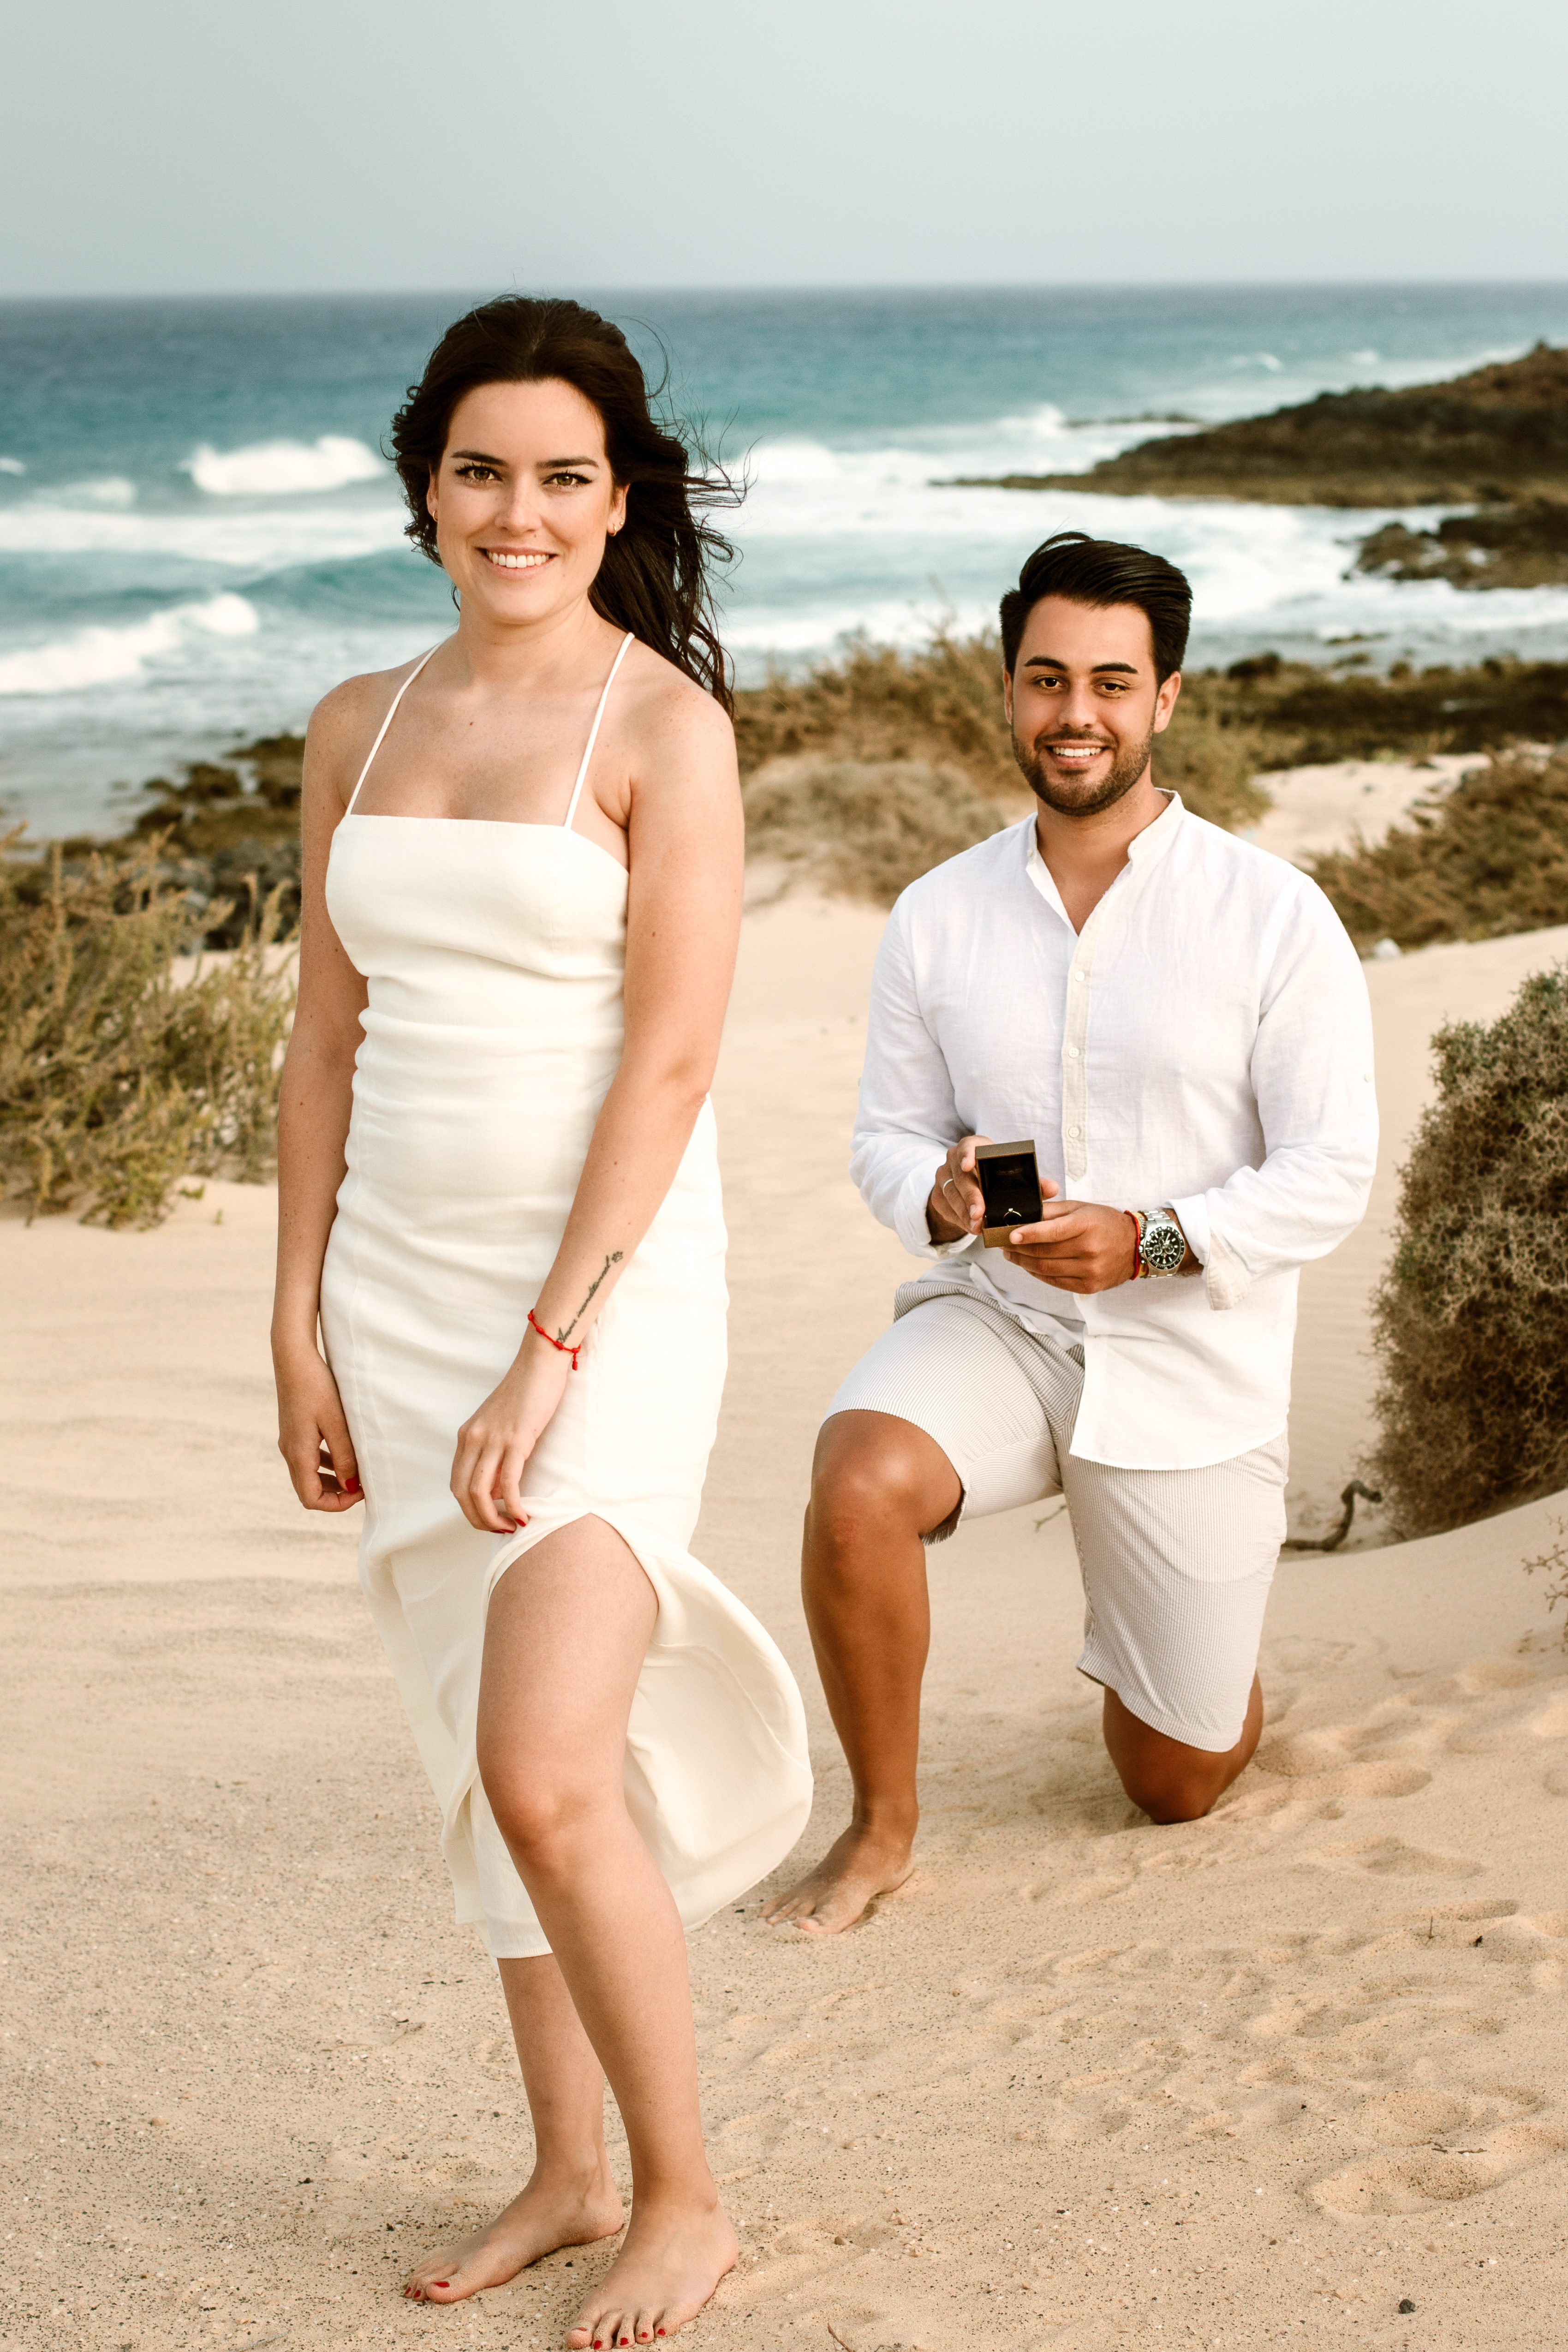 Professional Fuerteventura photography: Couple captured in stunning proposal moment on Grandes Playas - Dunes of Corralejo beach